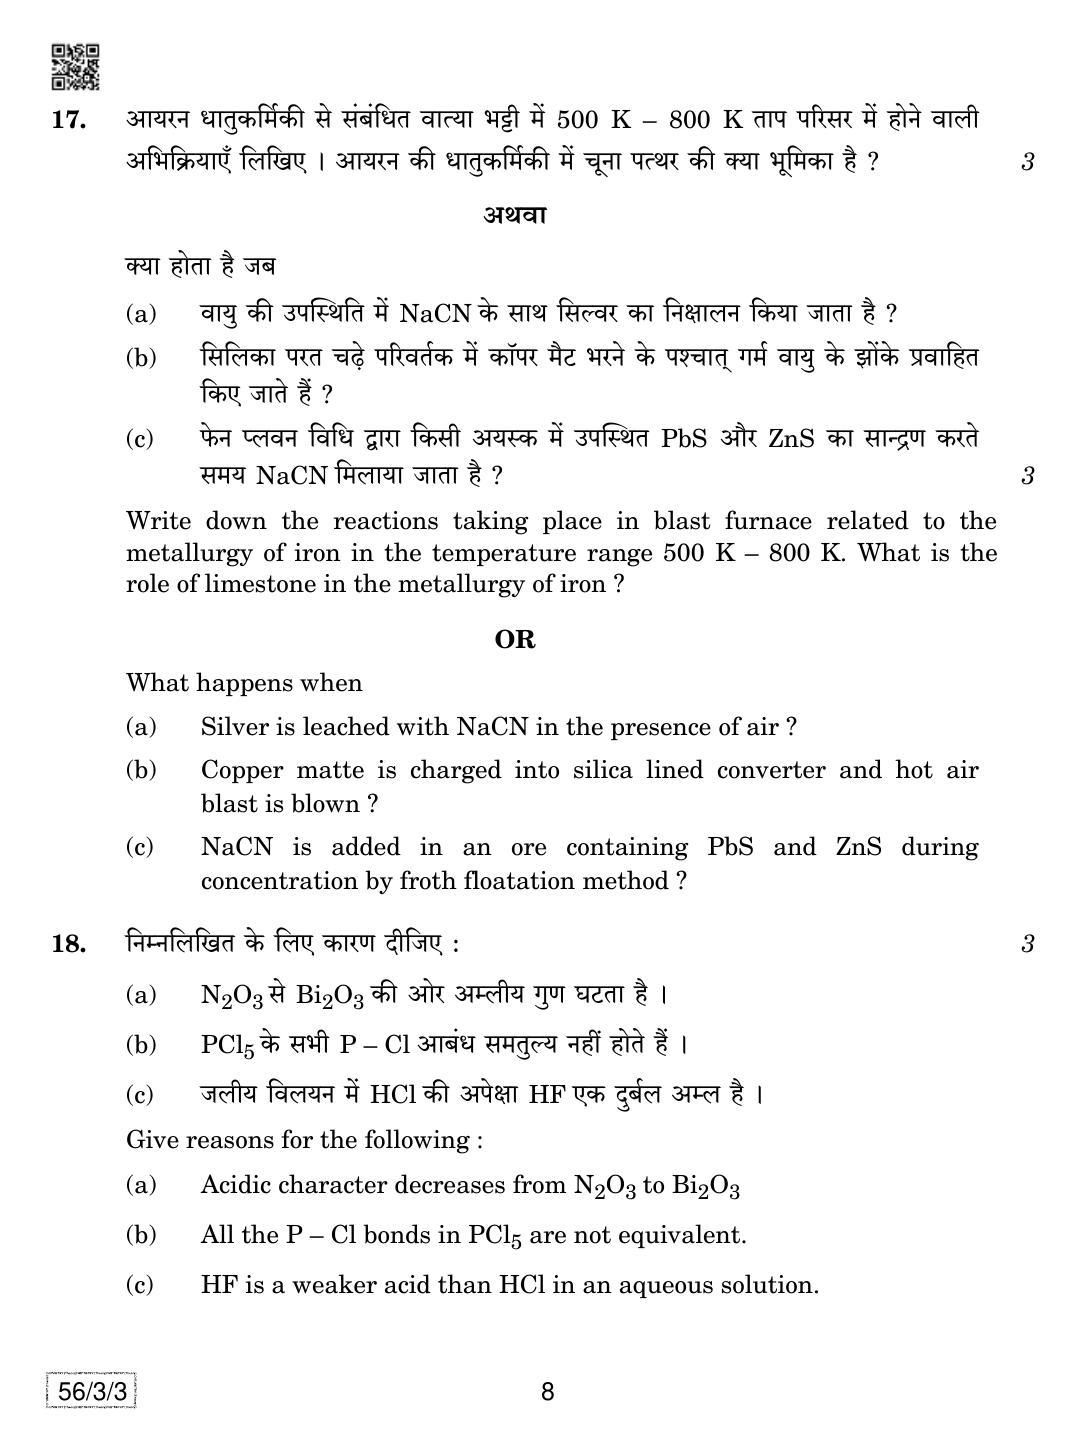 CBSE Class 12 56-3-3 Chemistry 2019 Question Paper - Page 8